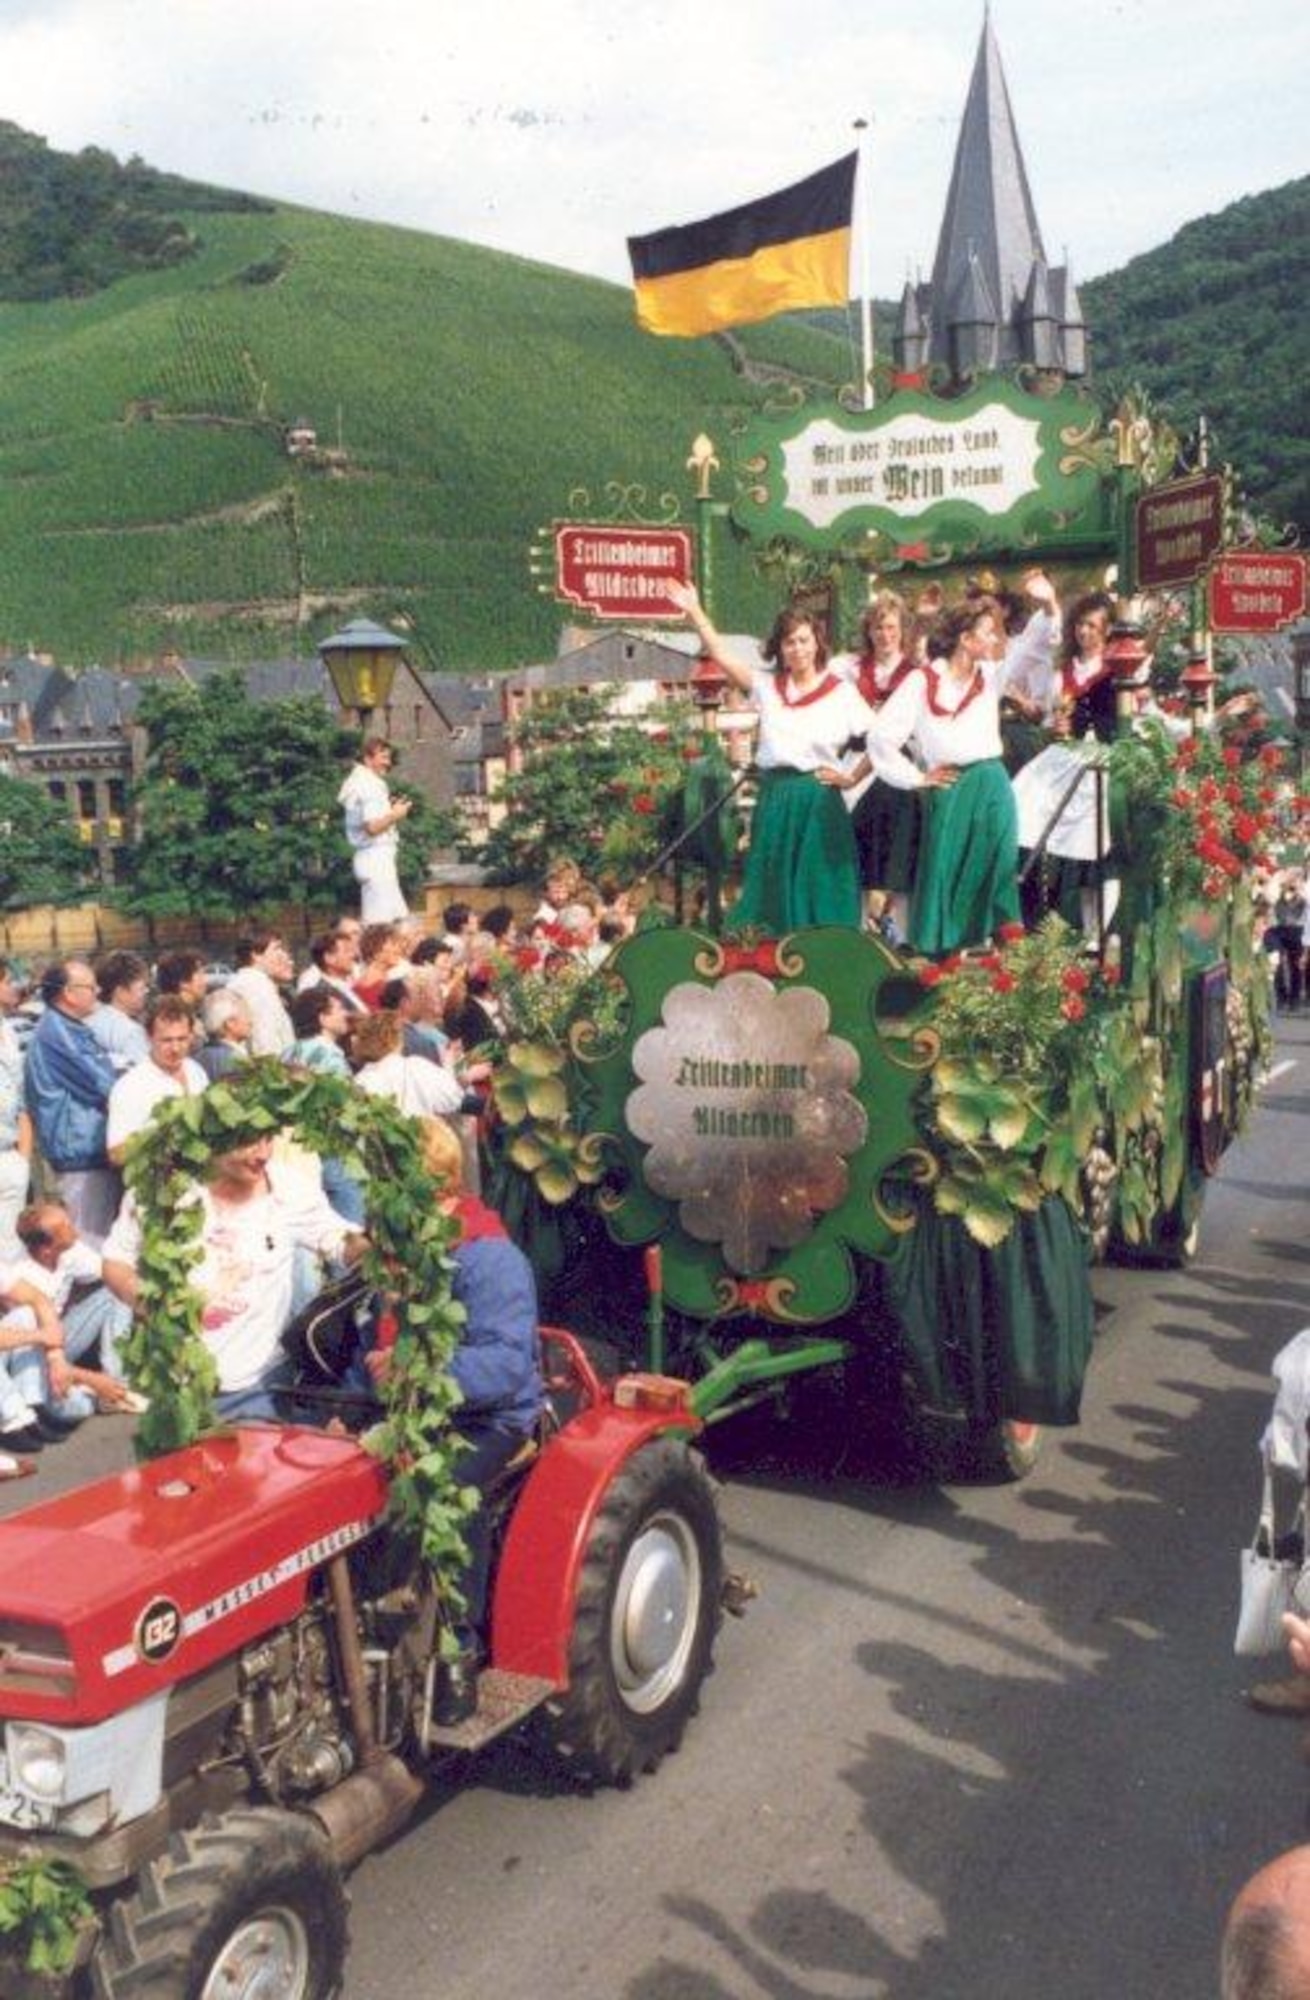 SPANGDAHLEM AIR BASE, Germany -- A group of wine queens from the Mosel area participate in a past Bernkastel Middle Mosel parade. This year’s parade is scheduled at 2 p.m. Sept. 5, featuring close to 100 floats, fanfares and bands parading through the city. The Bernkastel wine festival, which takes place Sept. 2-6 this year, is a highlight event in the Mosel valley. (Courtesy photo)